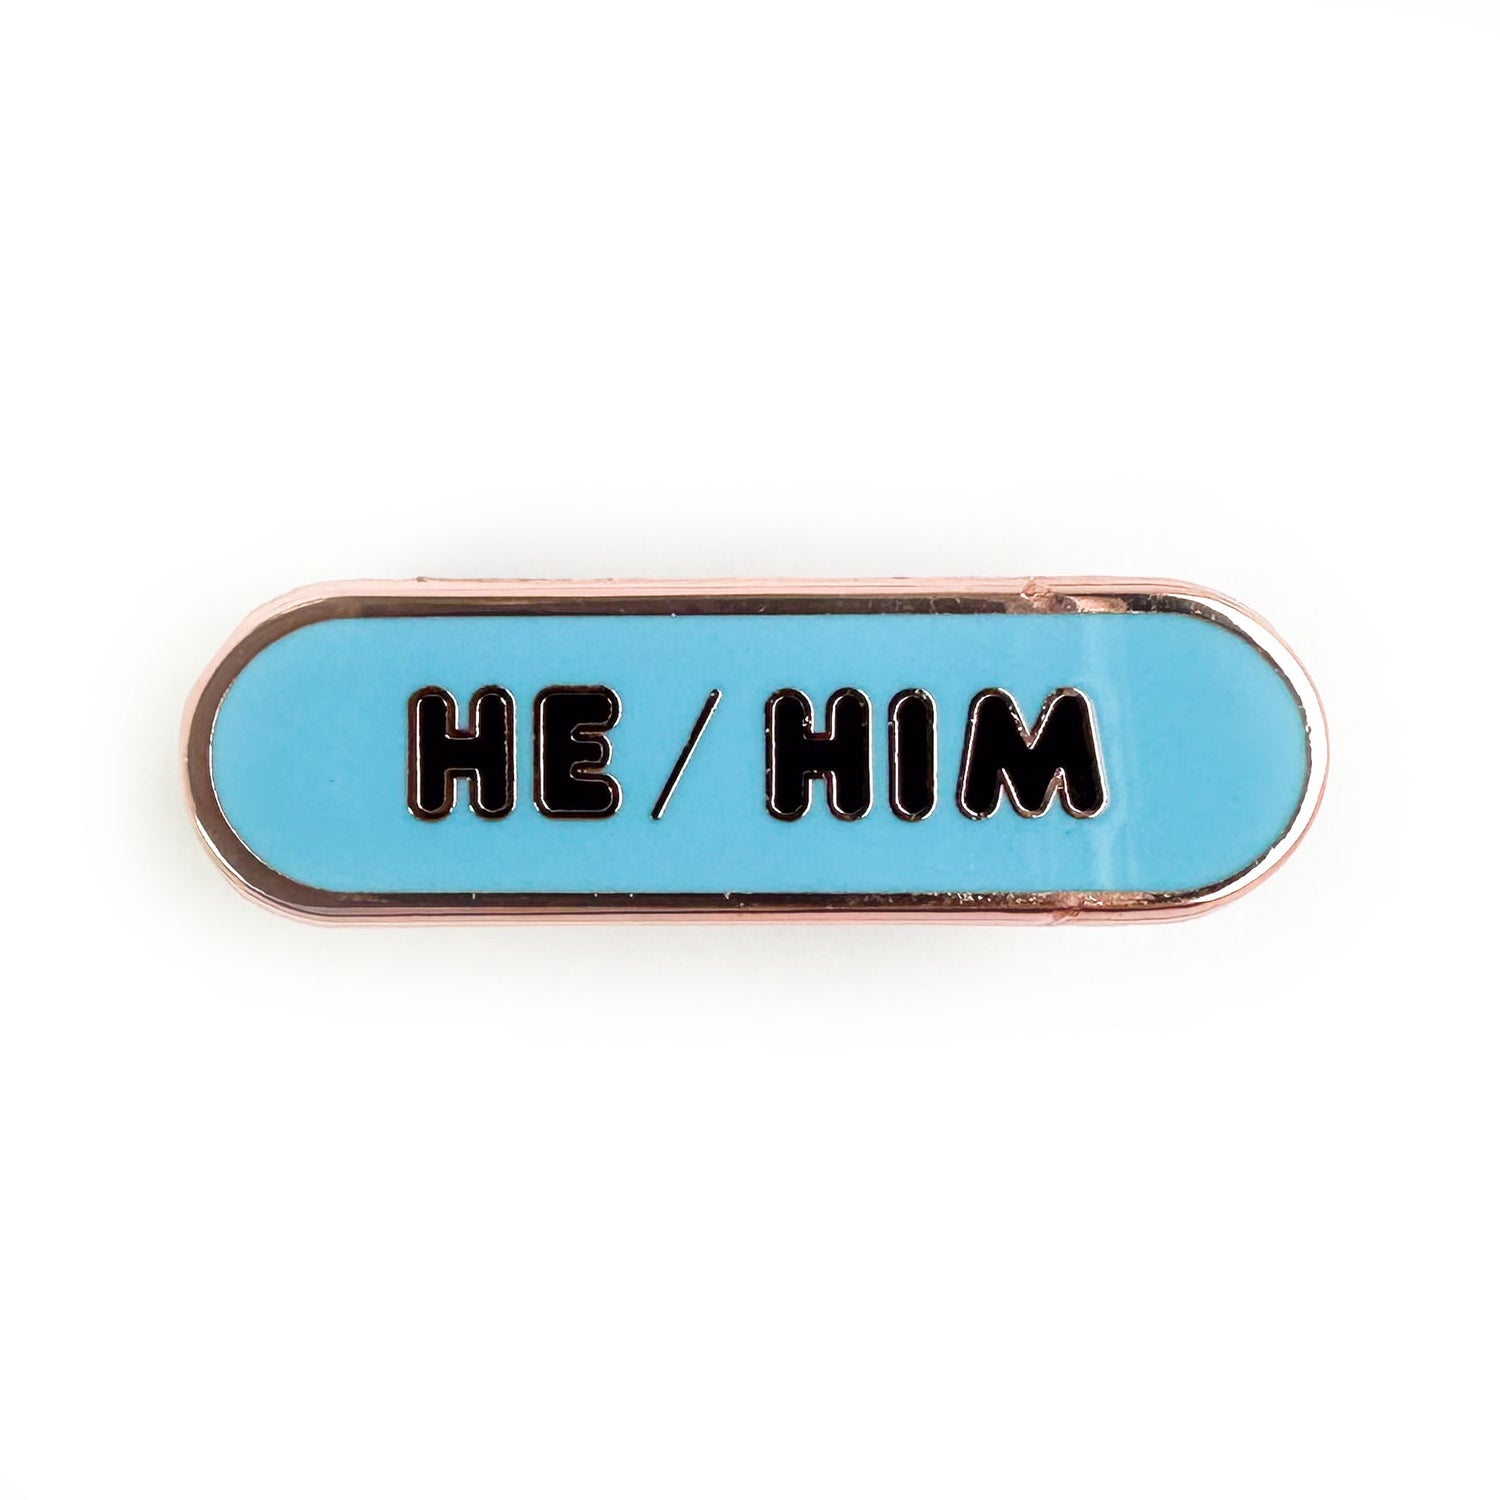 A light blue oval shaped pin that reads "He/Him".